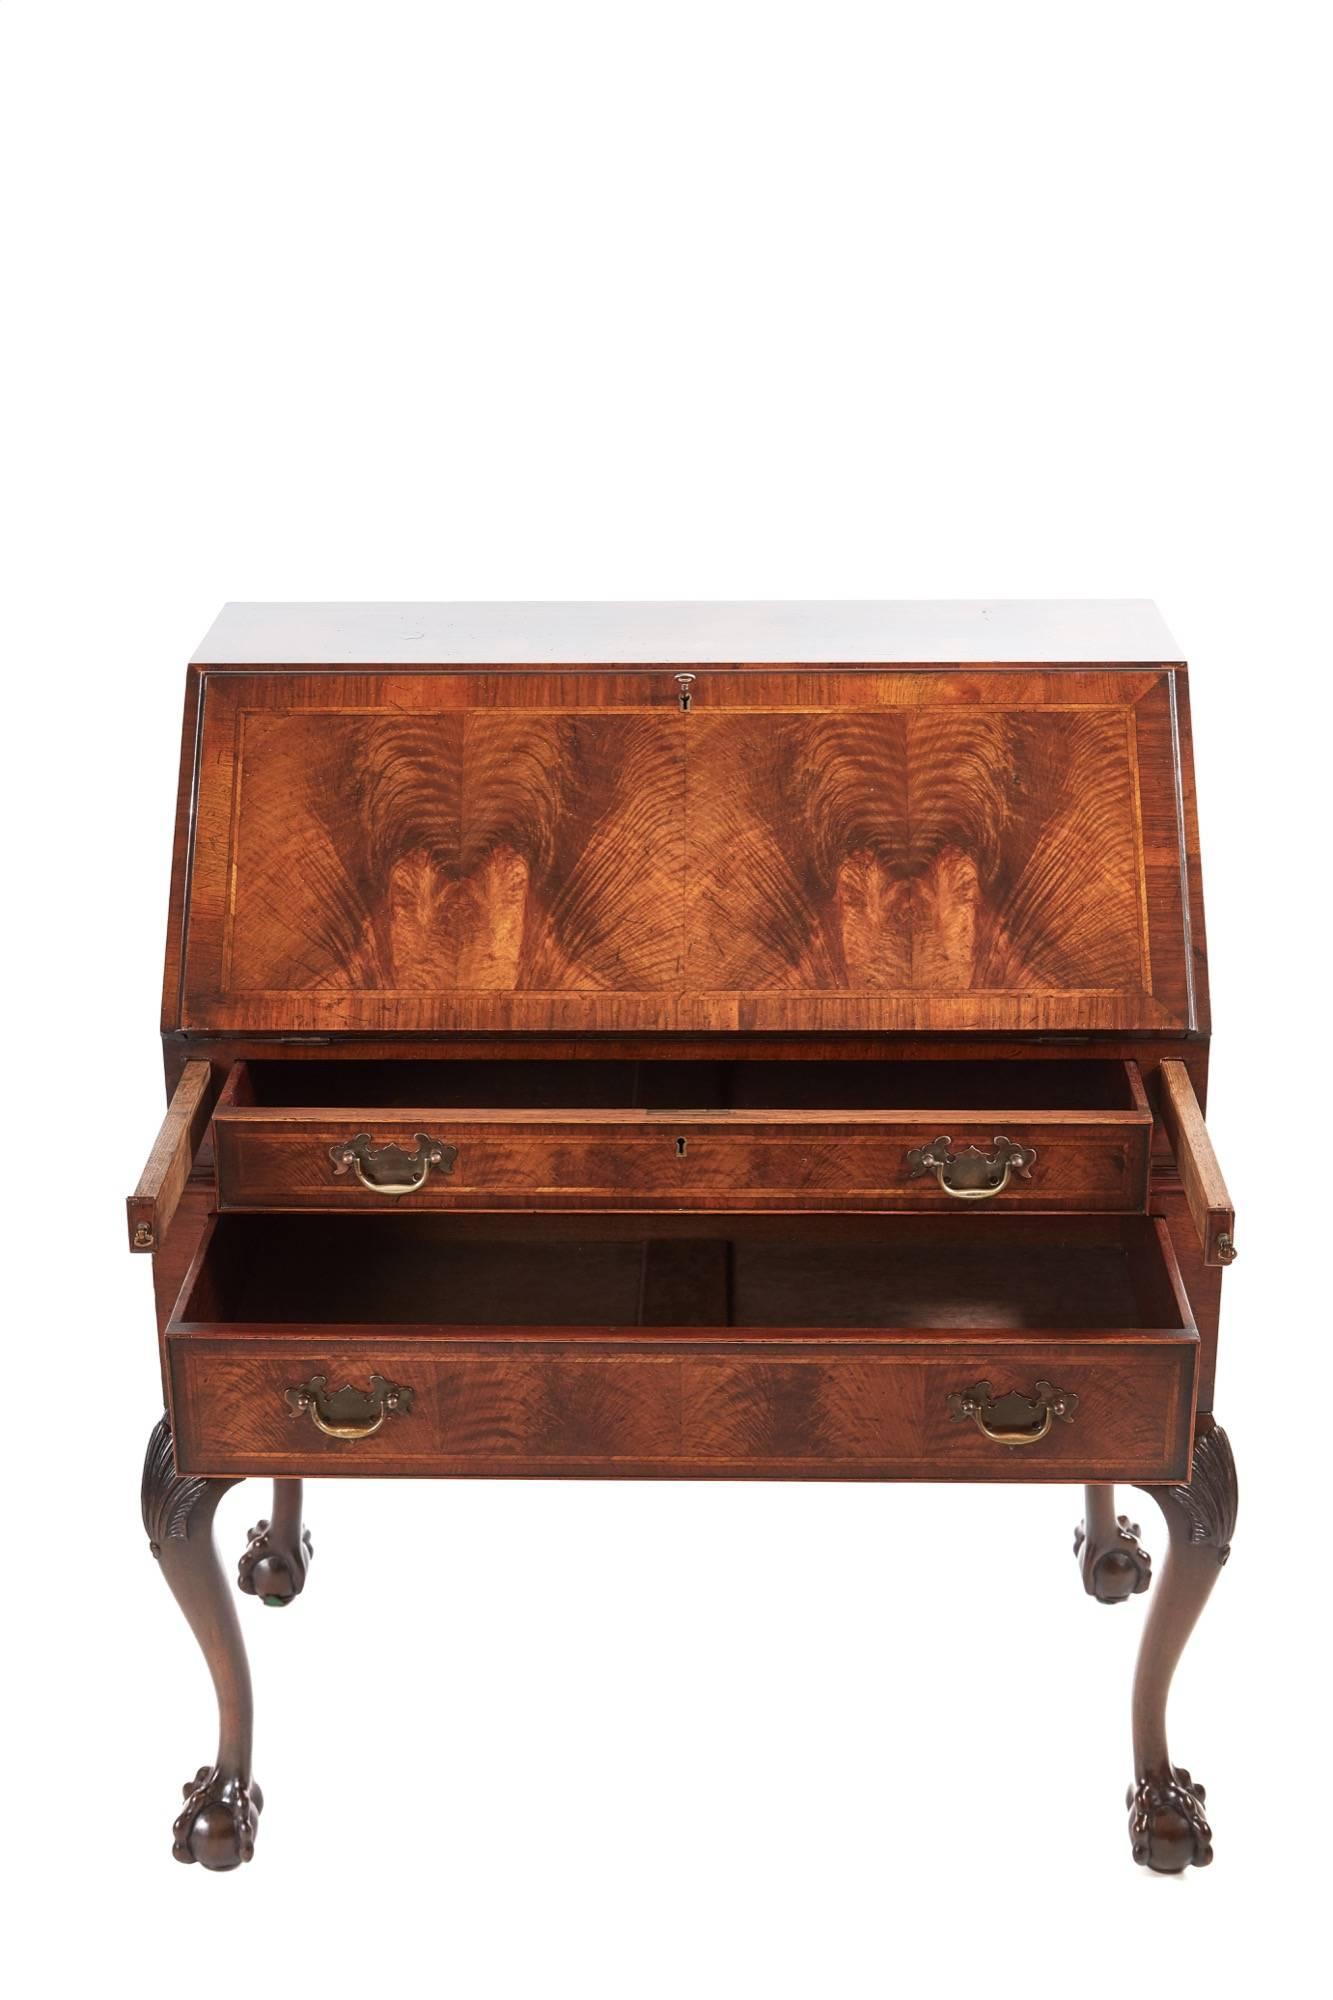 Fantastic walnut bureau on claw and ball legs, the top, fall and drawers all with herring bone inlay on fine burr walnut, the fall opens to reveal a lovely shaped fitted interior with drawers, pigeon holes and a centre door, two long front drawers